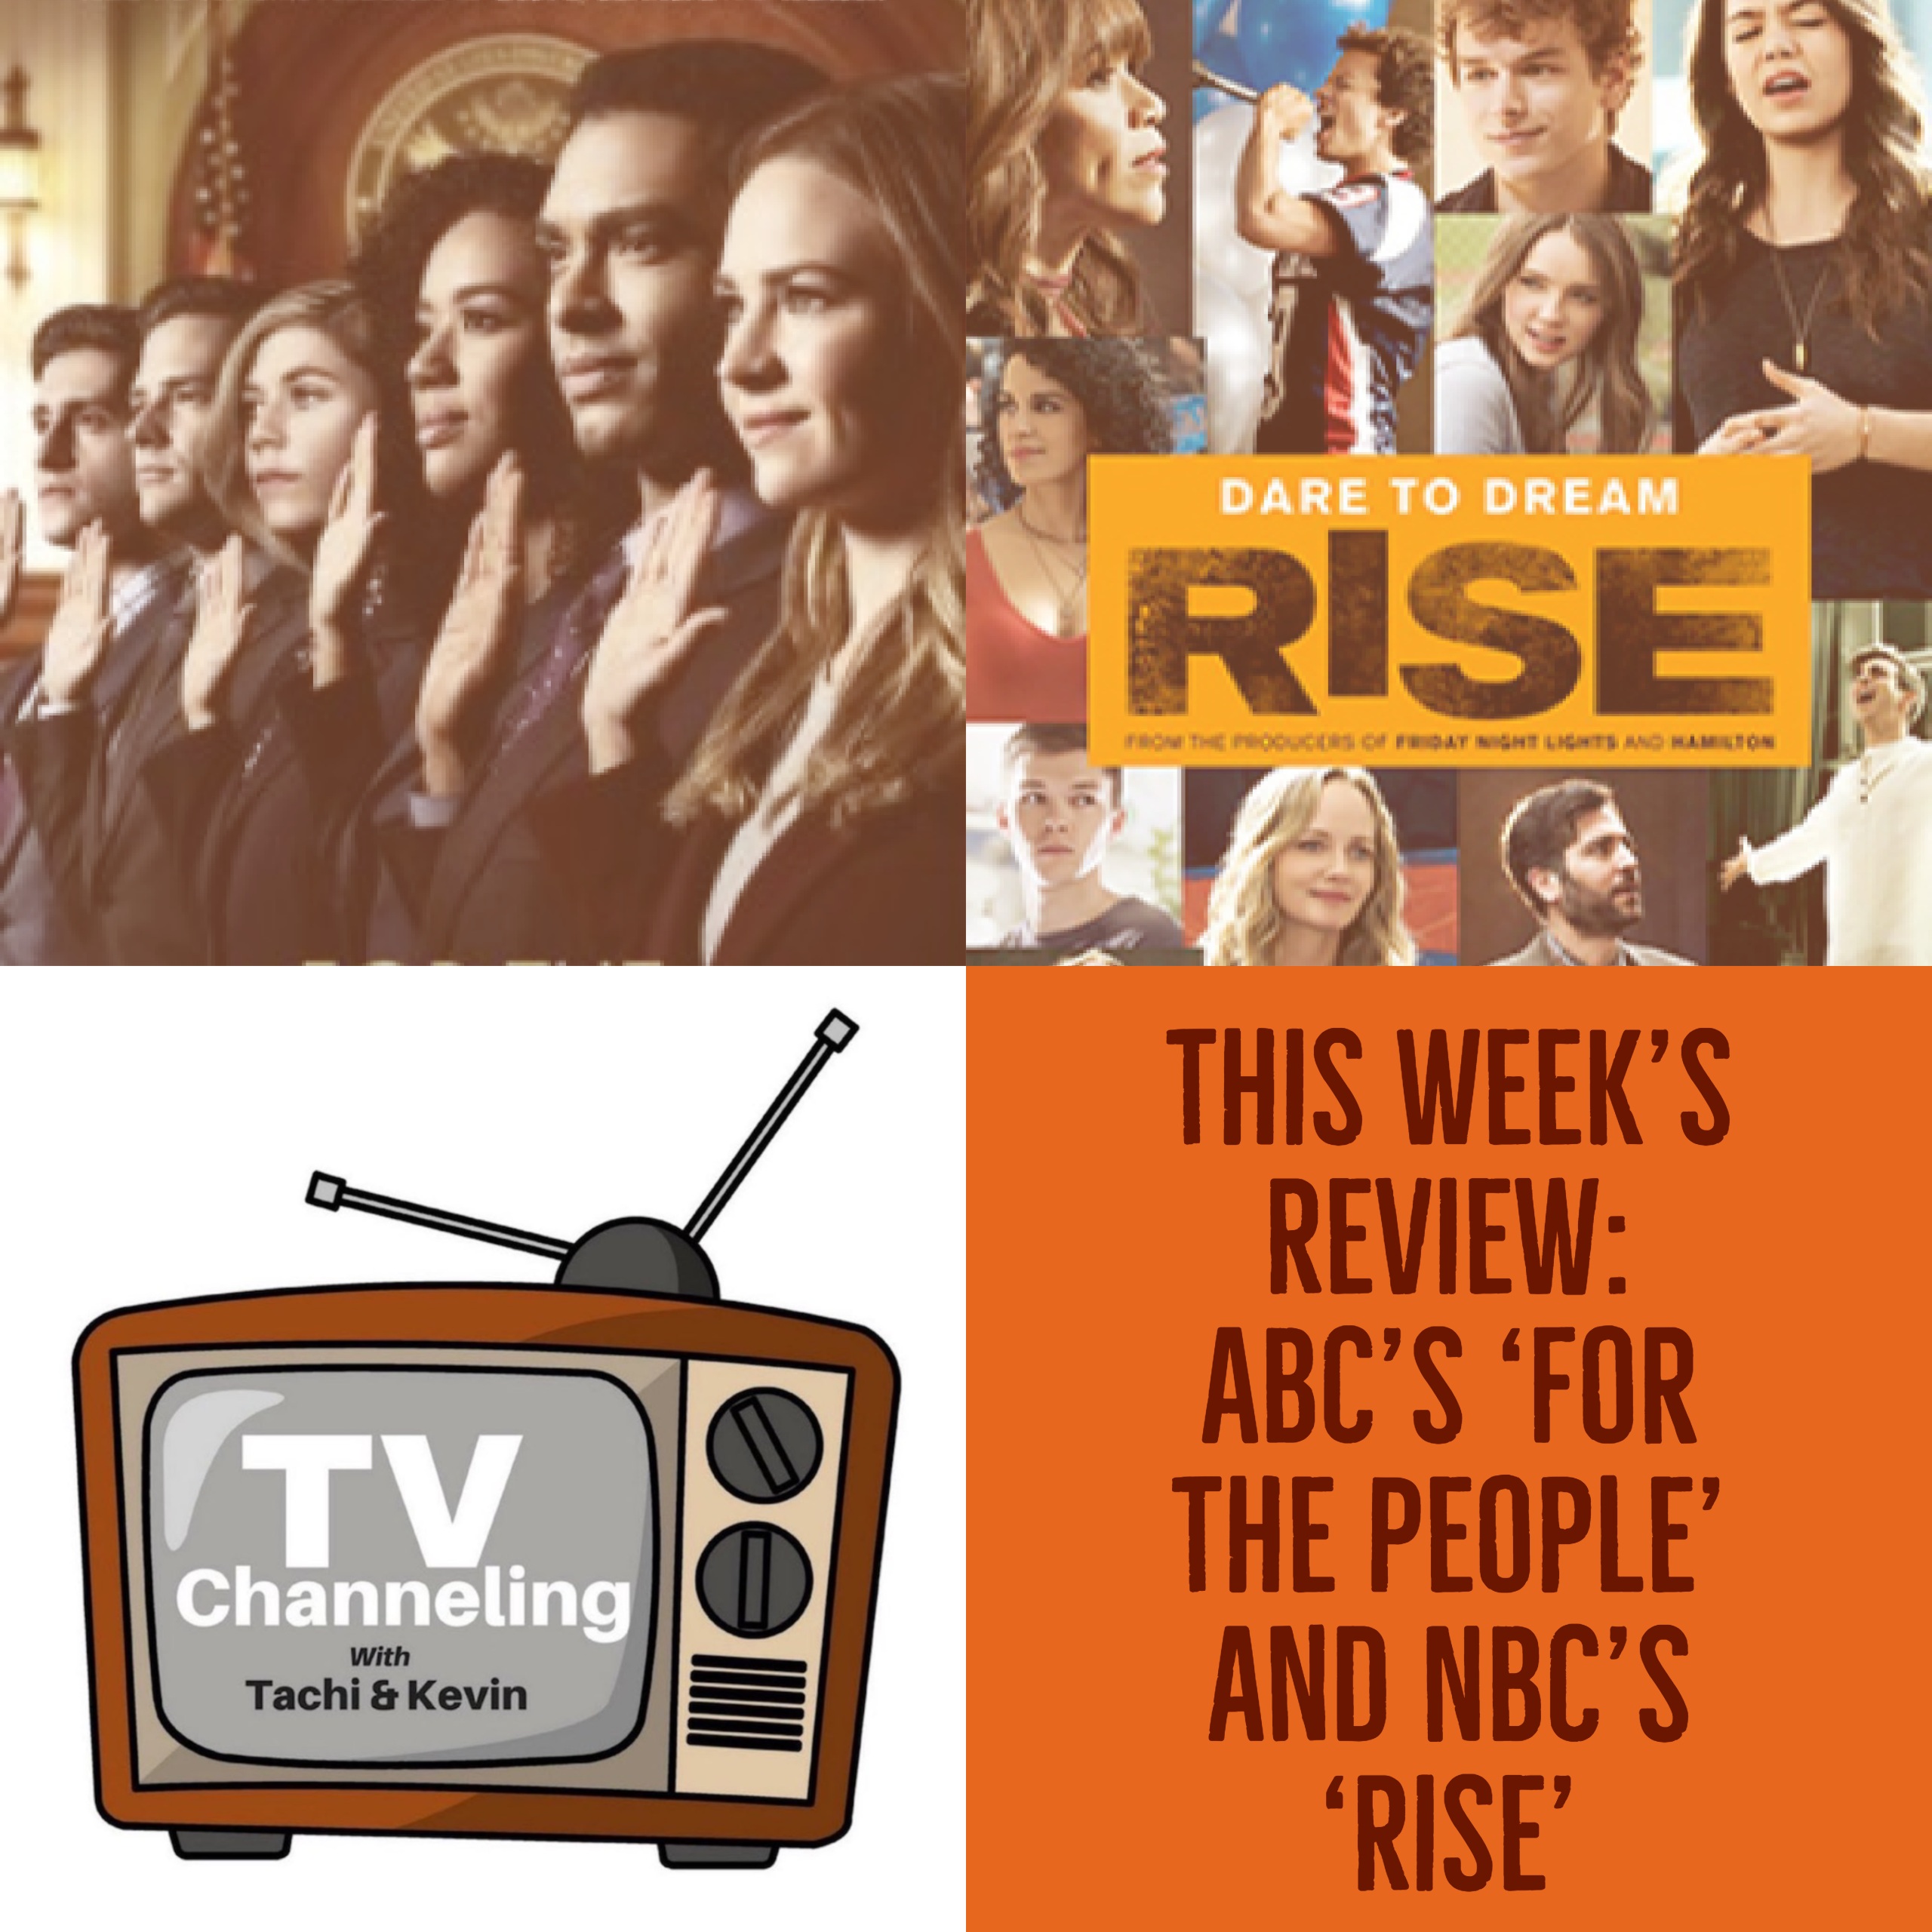 Reviews of two new dramas: ABC's 'For The People' & NBC's 'Rise'